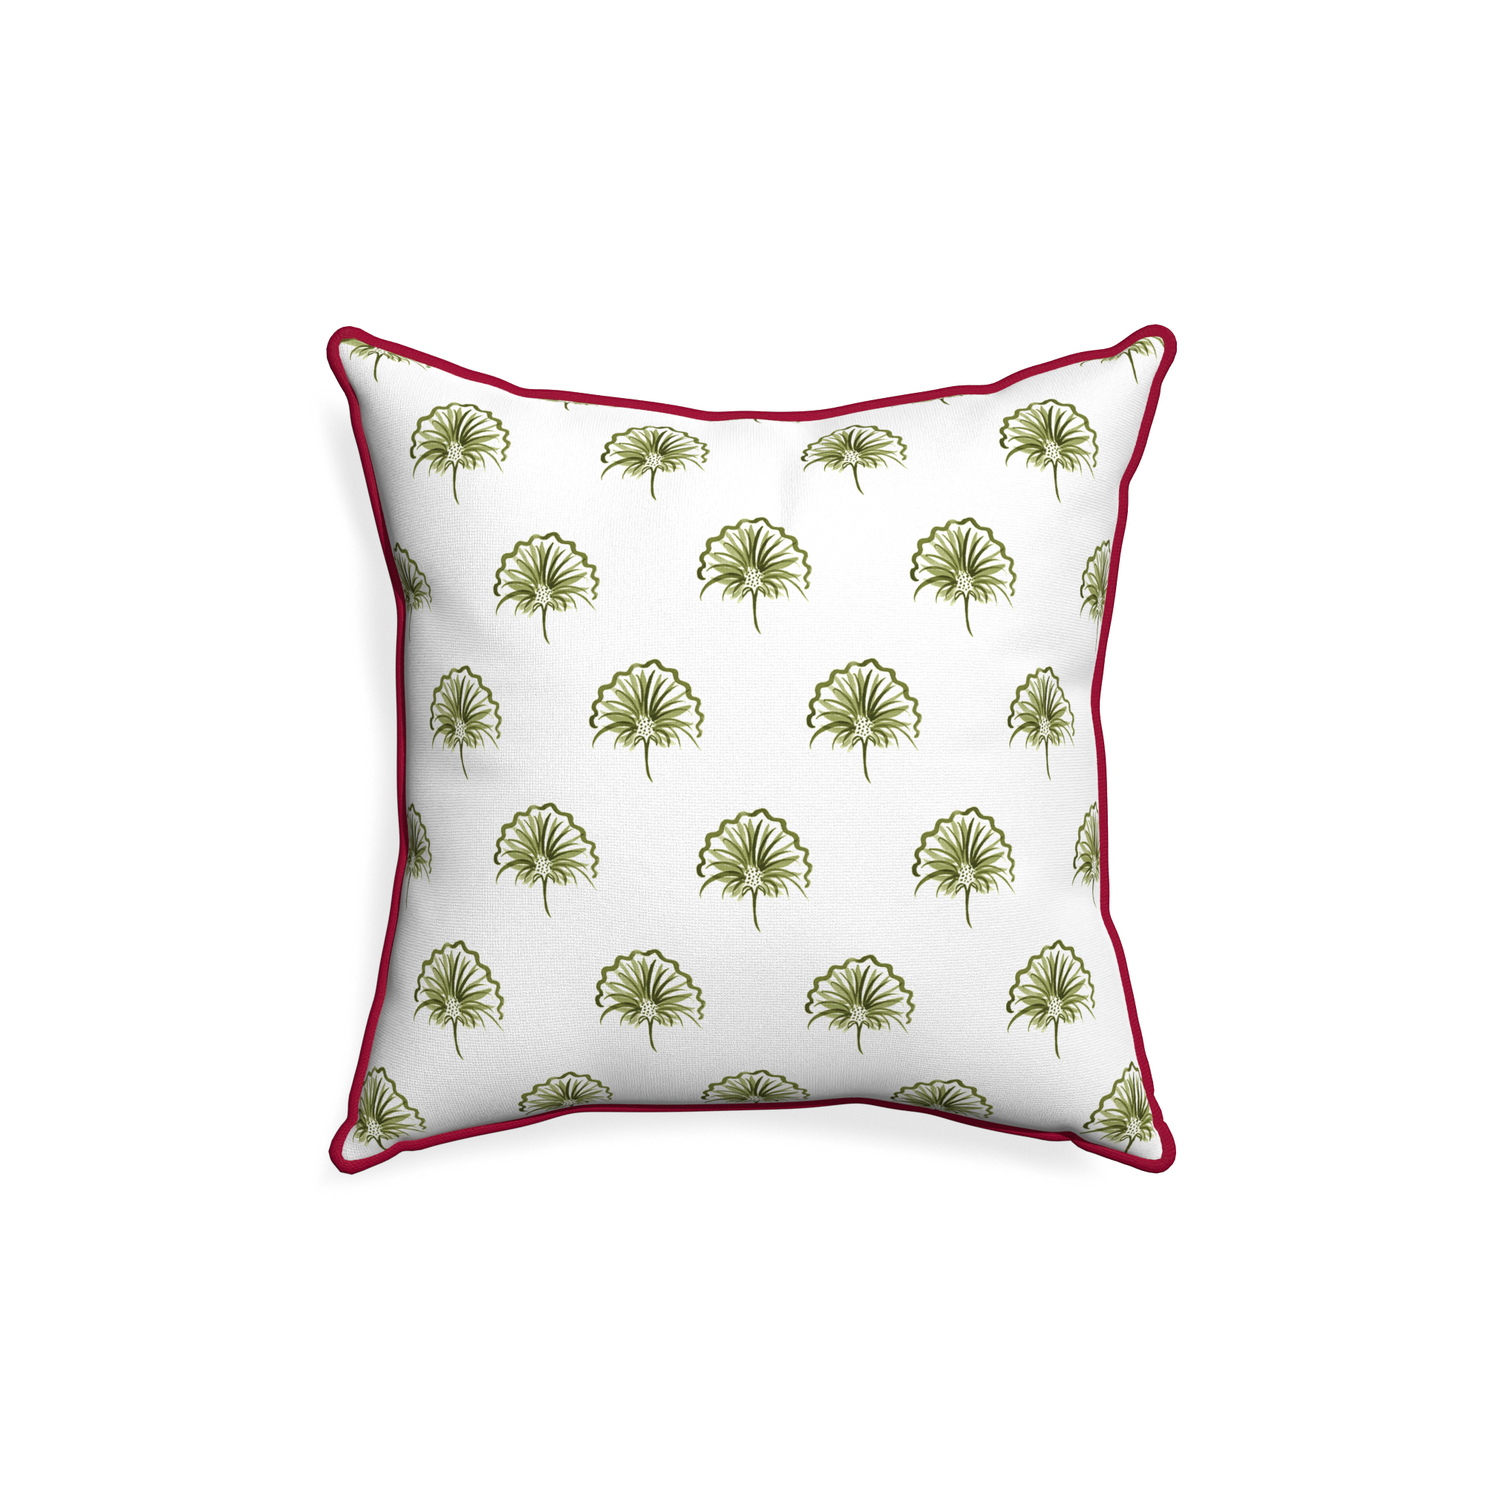 18-square penelope moss custom green floralpillow with raspberry piping on white background